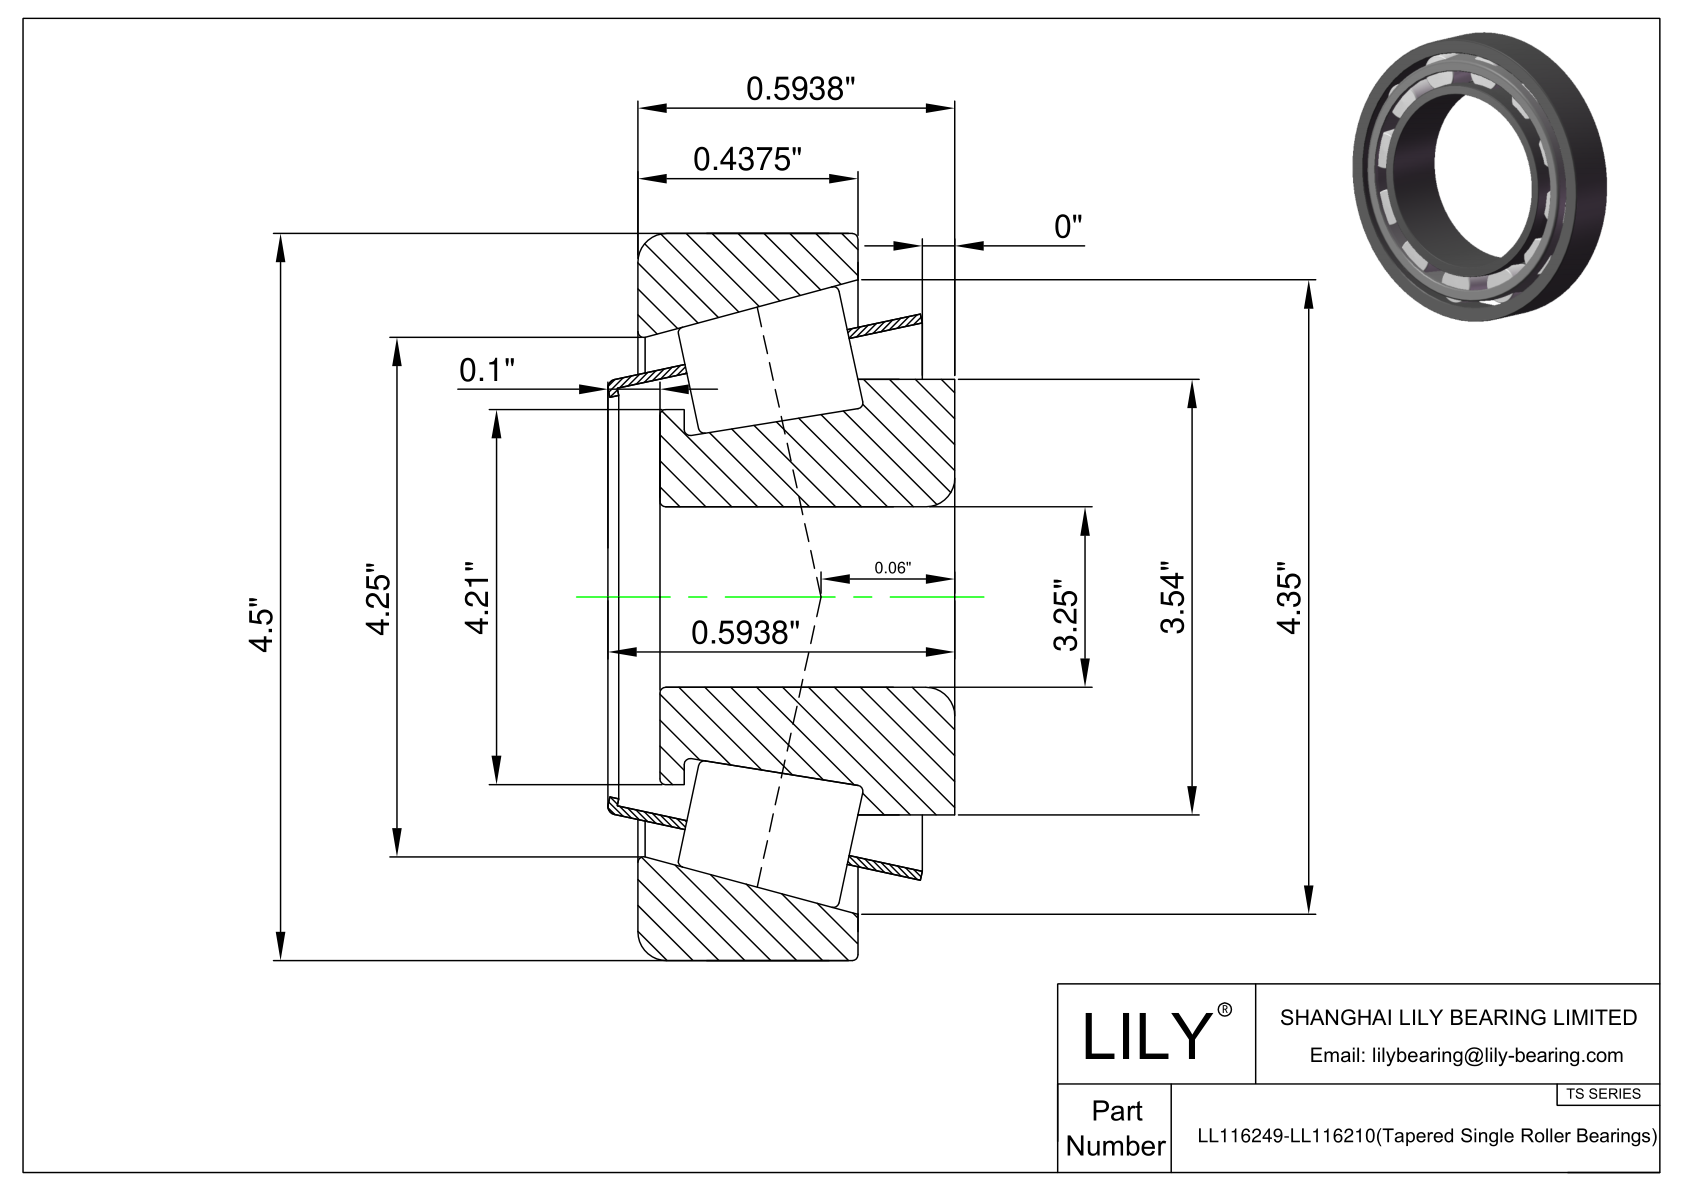 LL116249-LL116210 TS (Tapered Single Roller Bearings) (Imperial) cad drawing